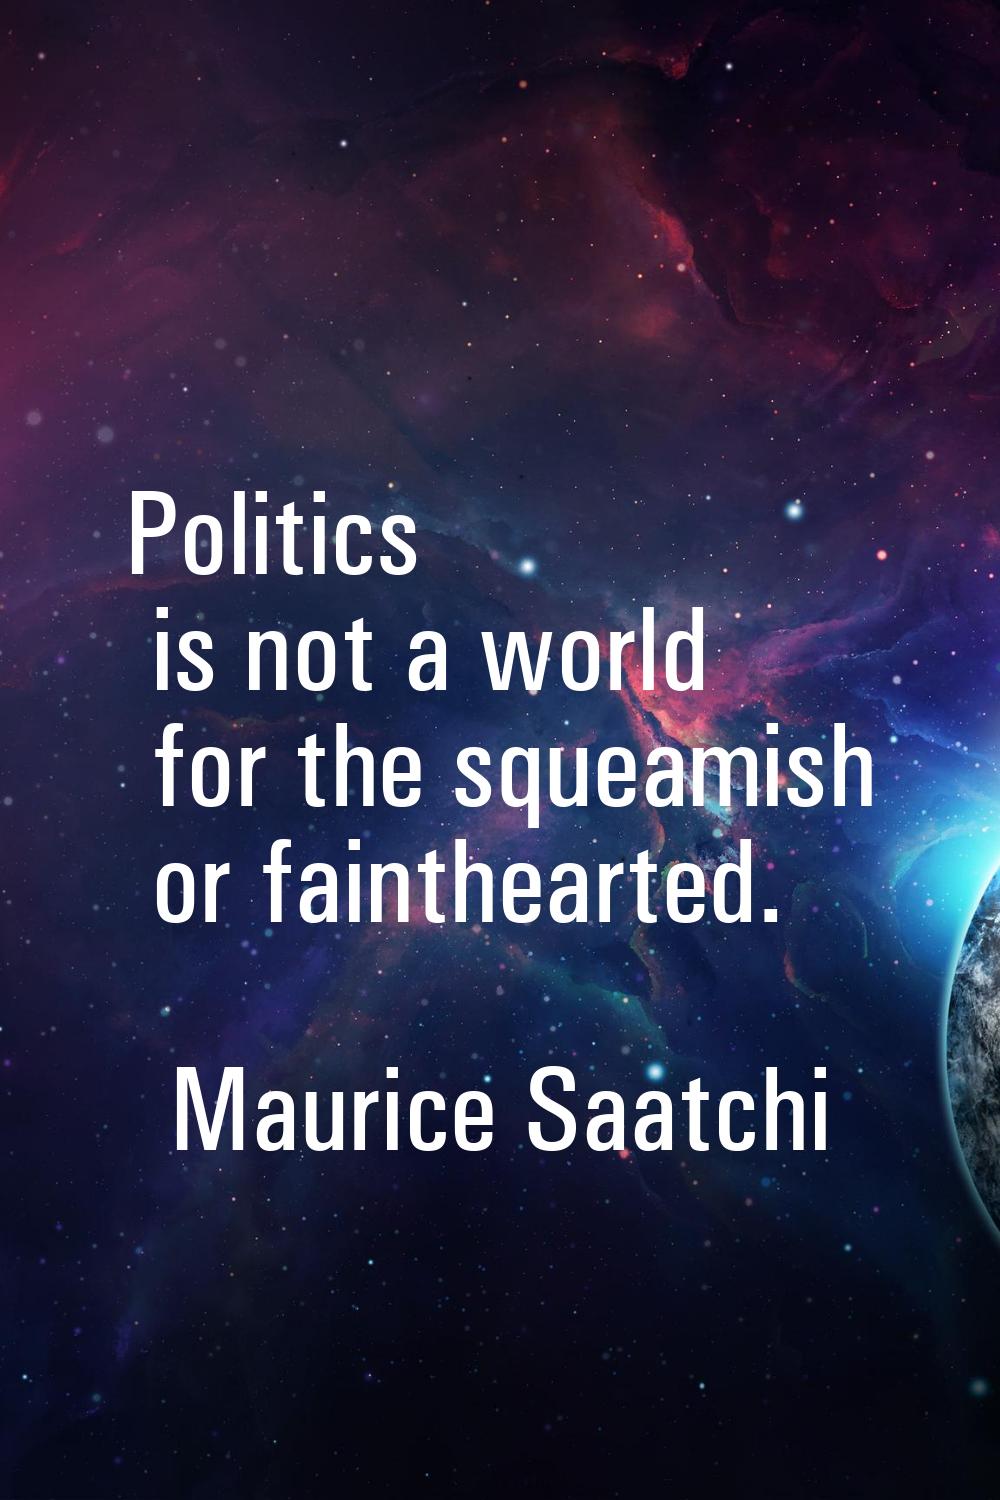 Politics is not a world for the squeamish or fainthearted.